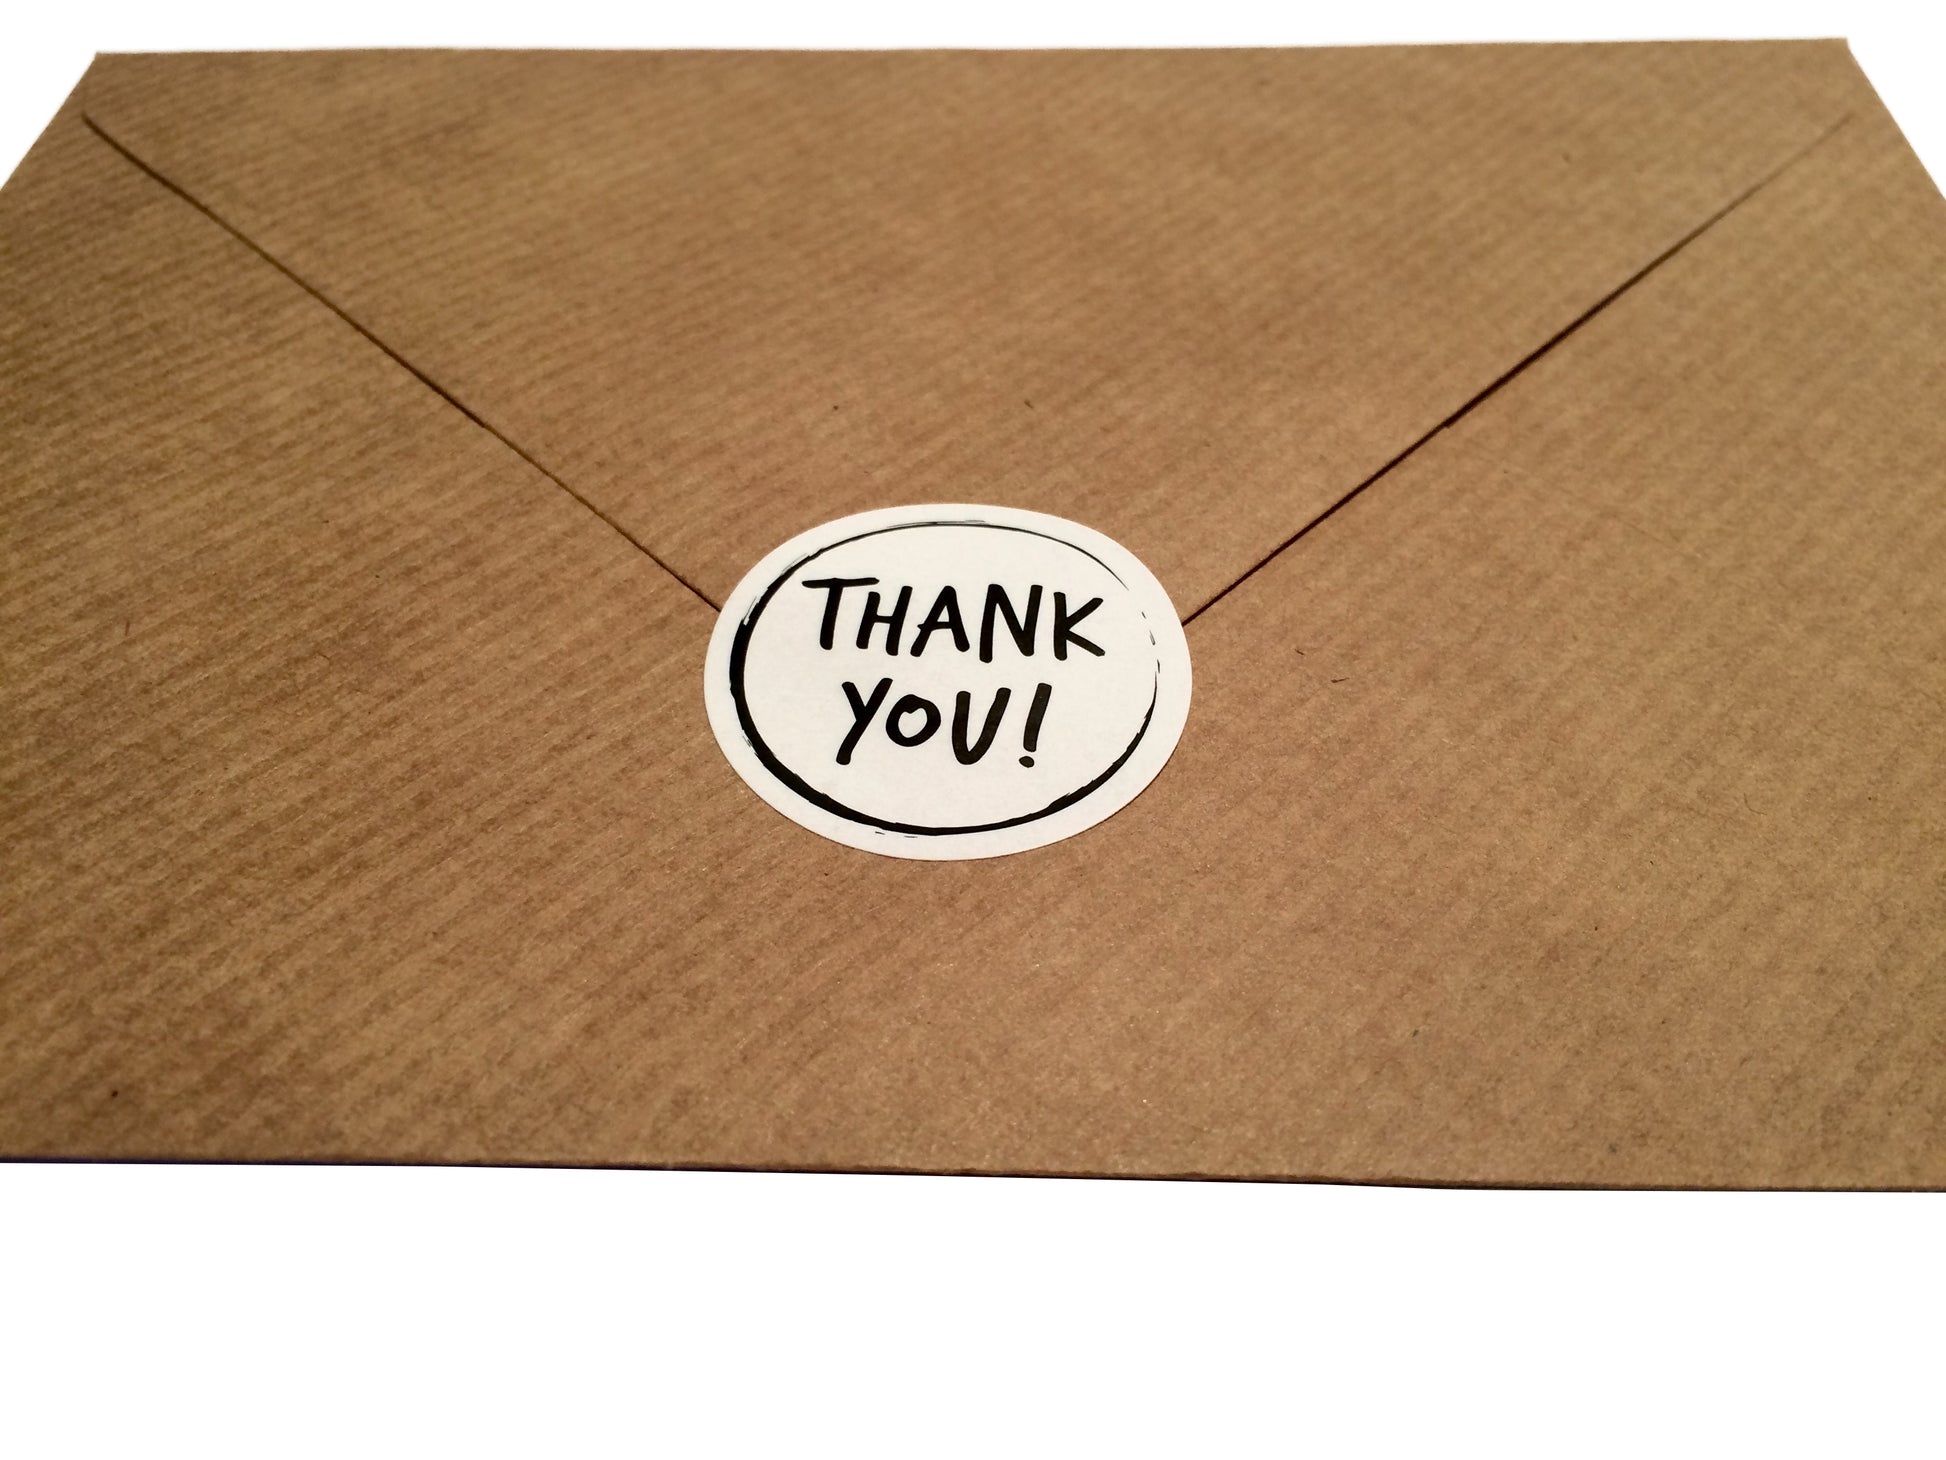 Thank you label on paper envelope